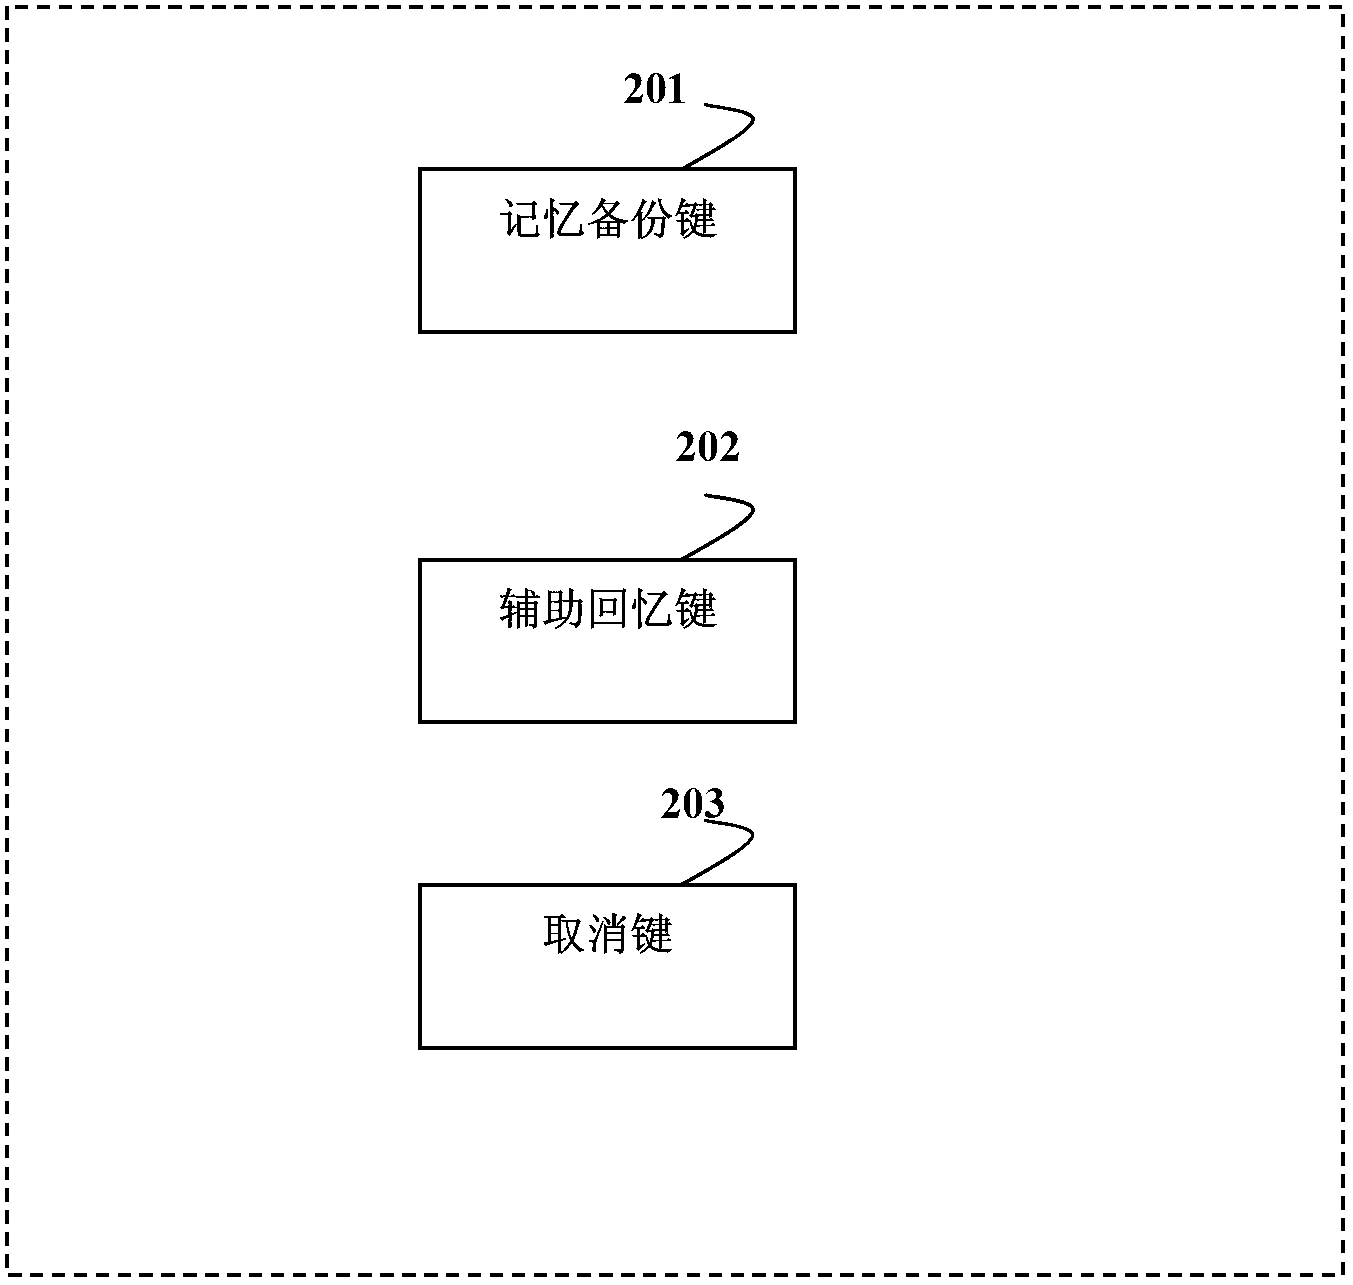 Memory auxiliary device